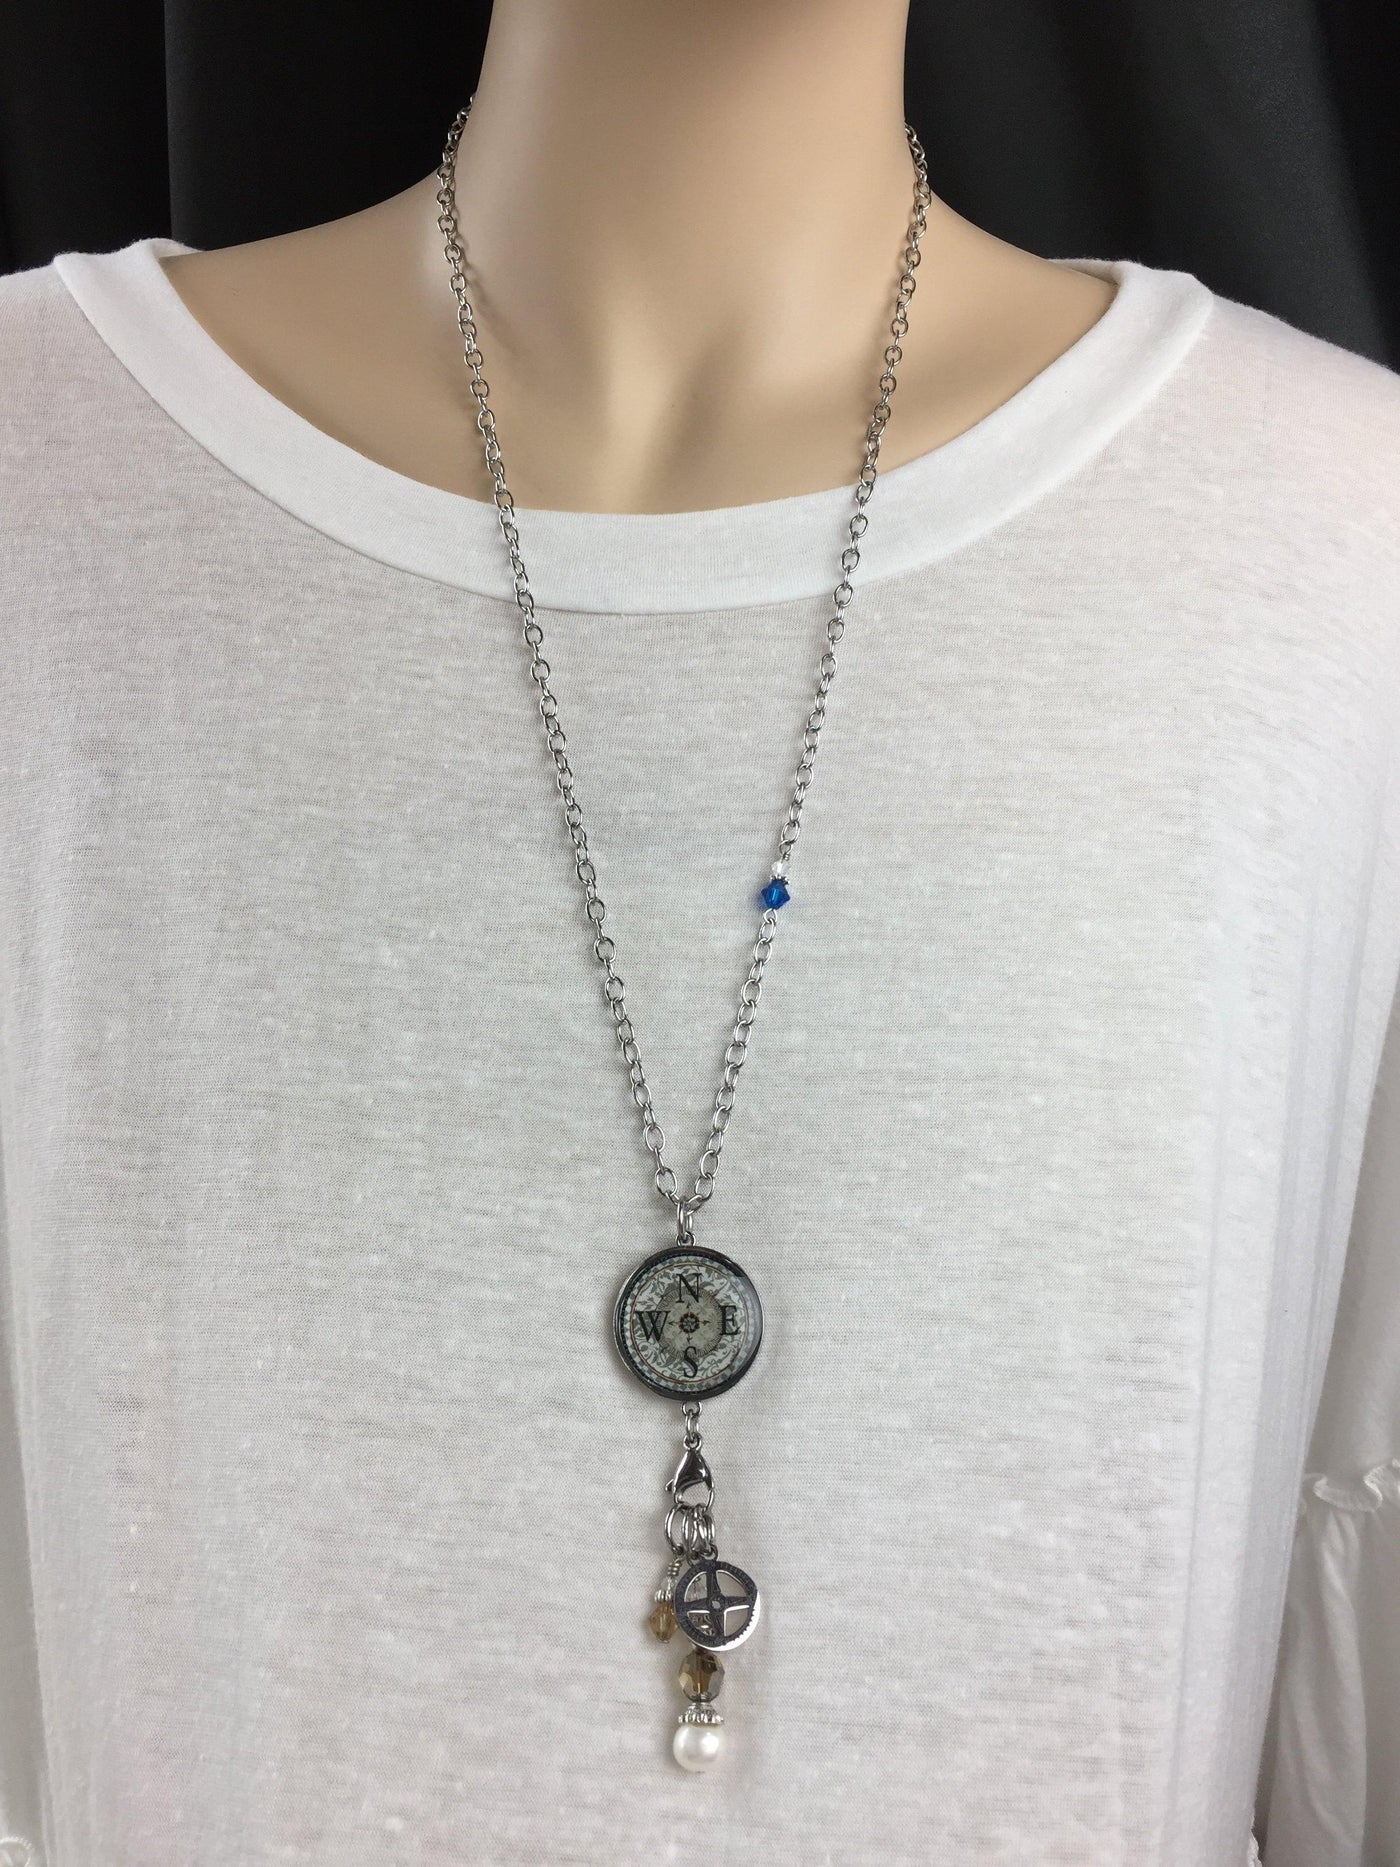 Brand: Spirit LaLa - Reversible Dangle Compass Inspirational Necklace -  BoHo, Compass, Gift Idea, Inspirational quote, Jewelry, jewelry made in USA, Made in America, made in usa, Made Local, Necklace, Pendant, Statement Necklace, Women - Classy Cozy Cool Boutique